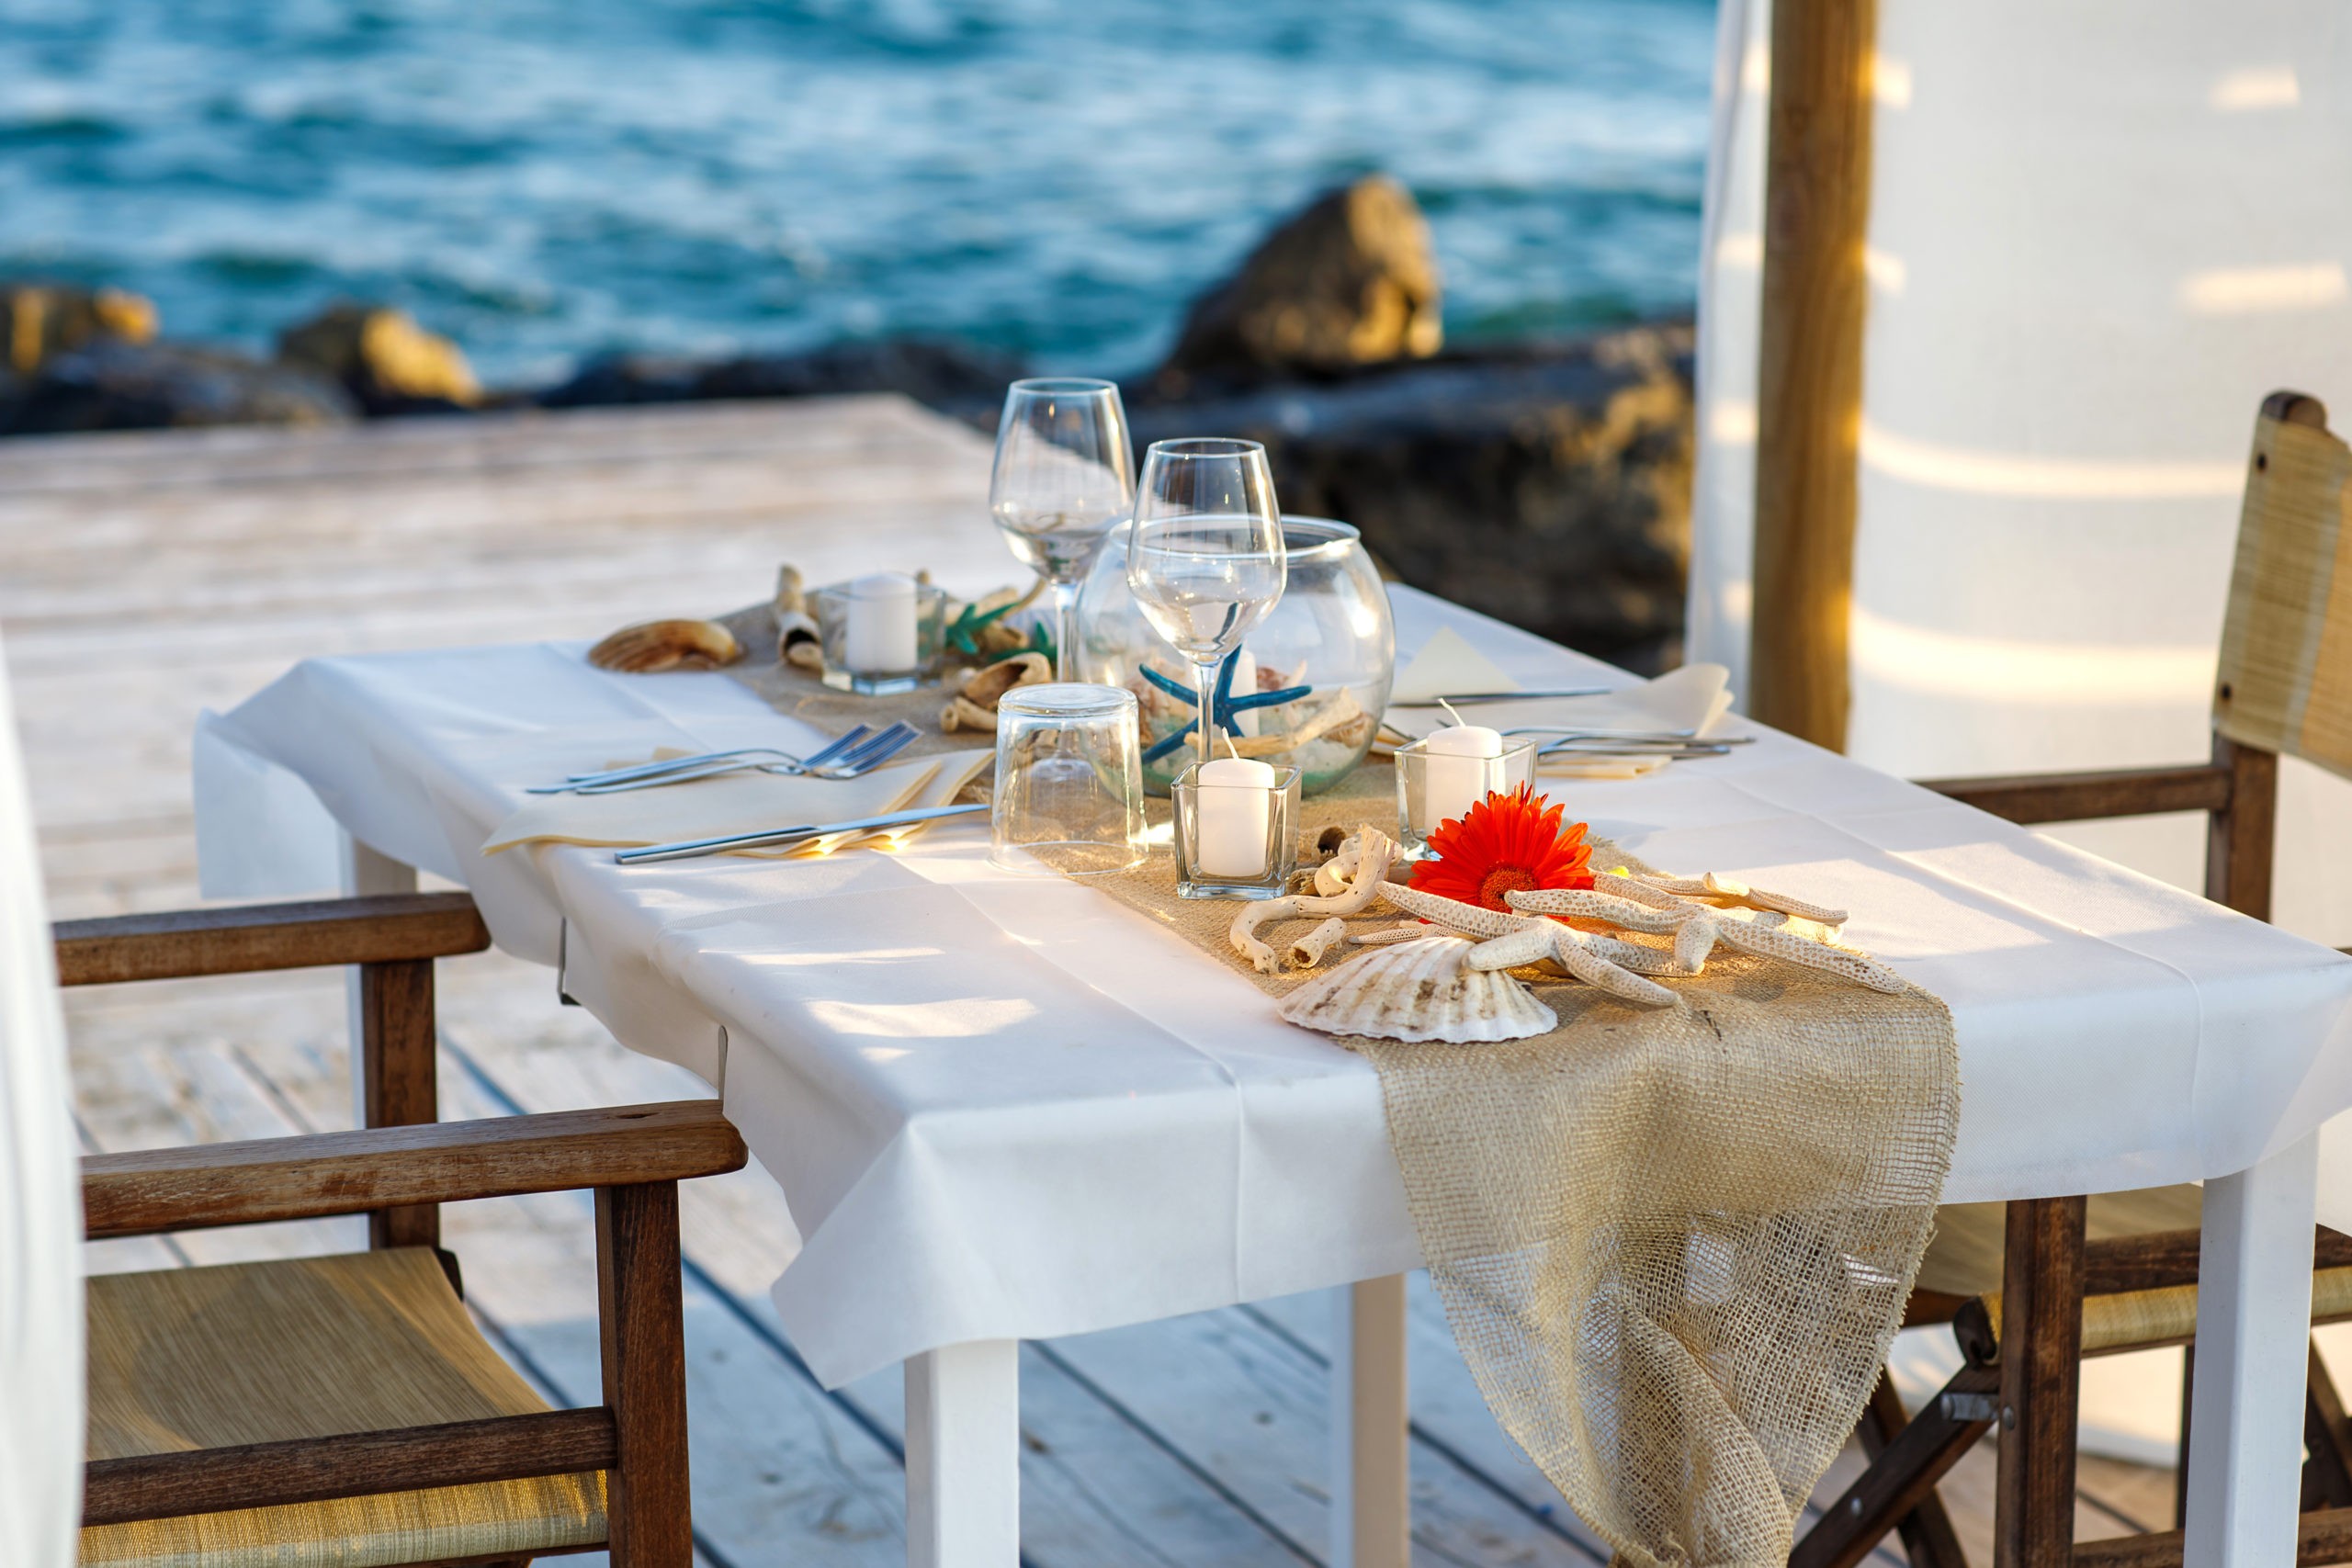 Dinner table set for two in a beach style next to rocks with waves crashing